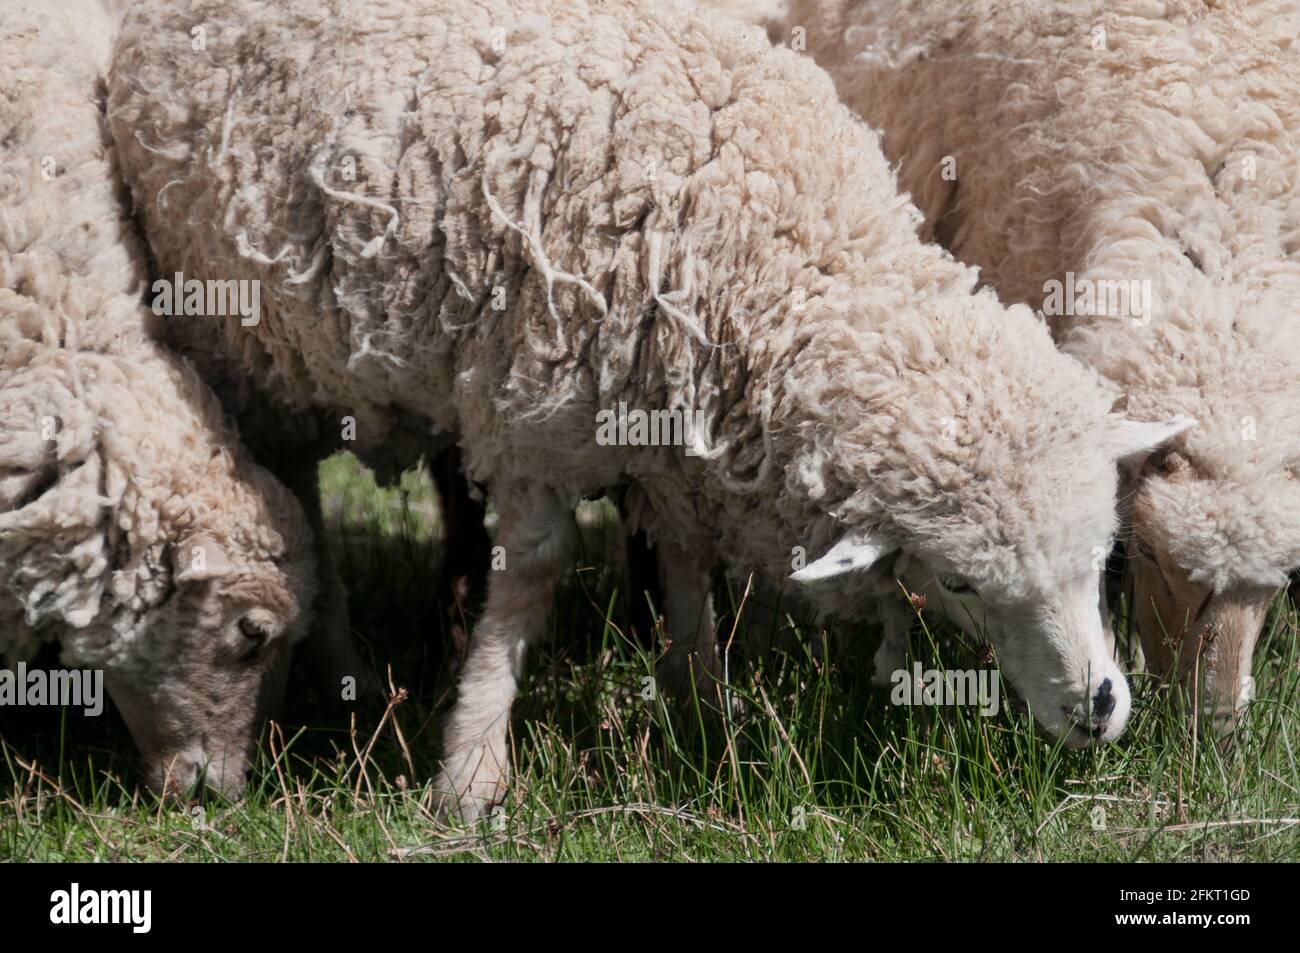 A herd of sheep in Yavi, Jujuy, Argentina Stock Photo